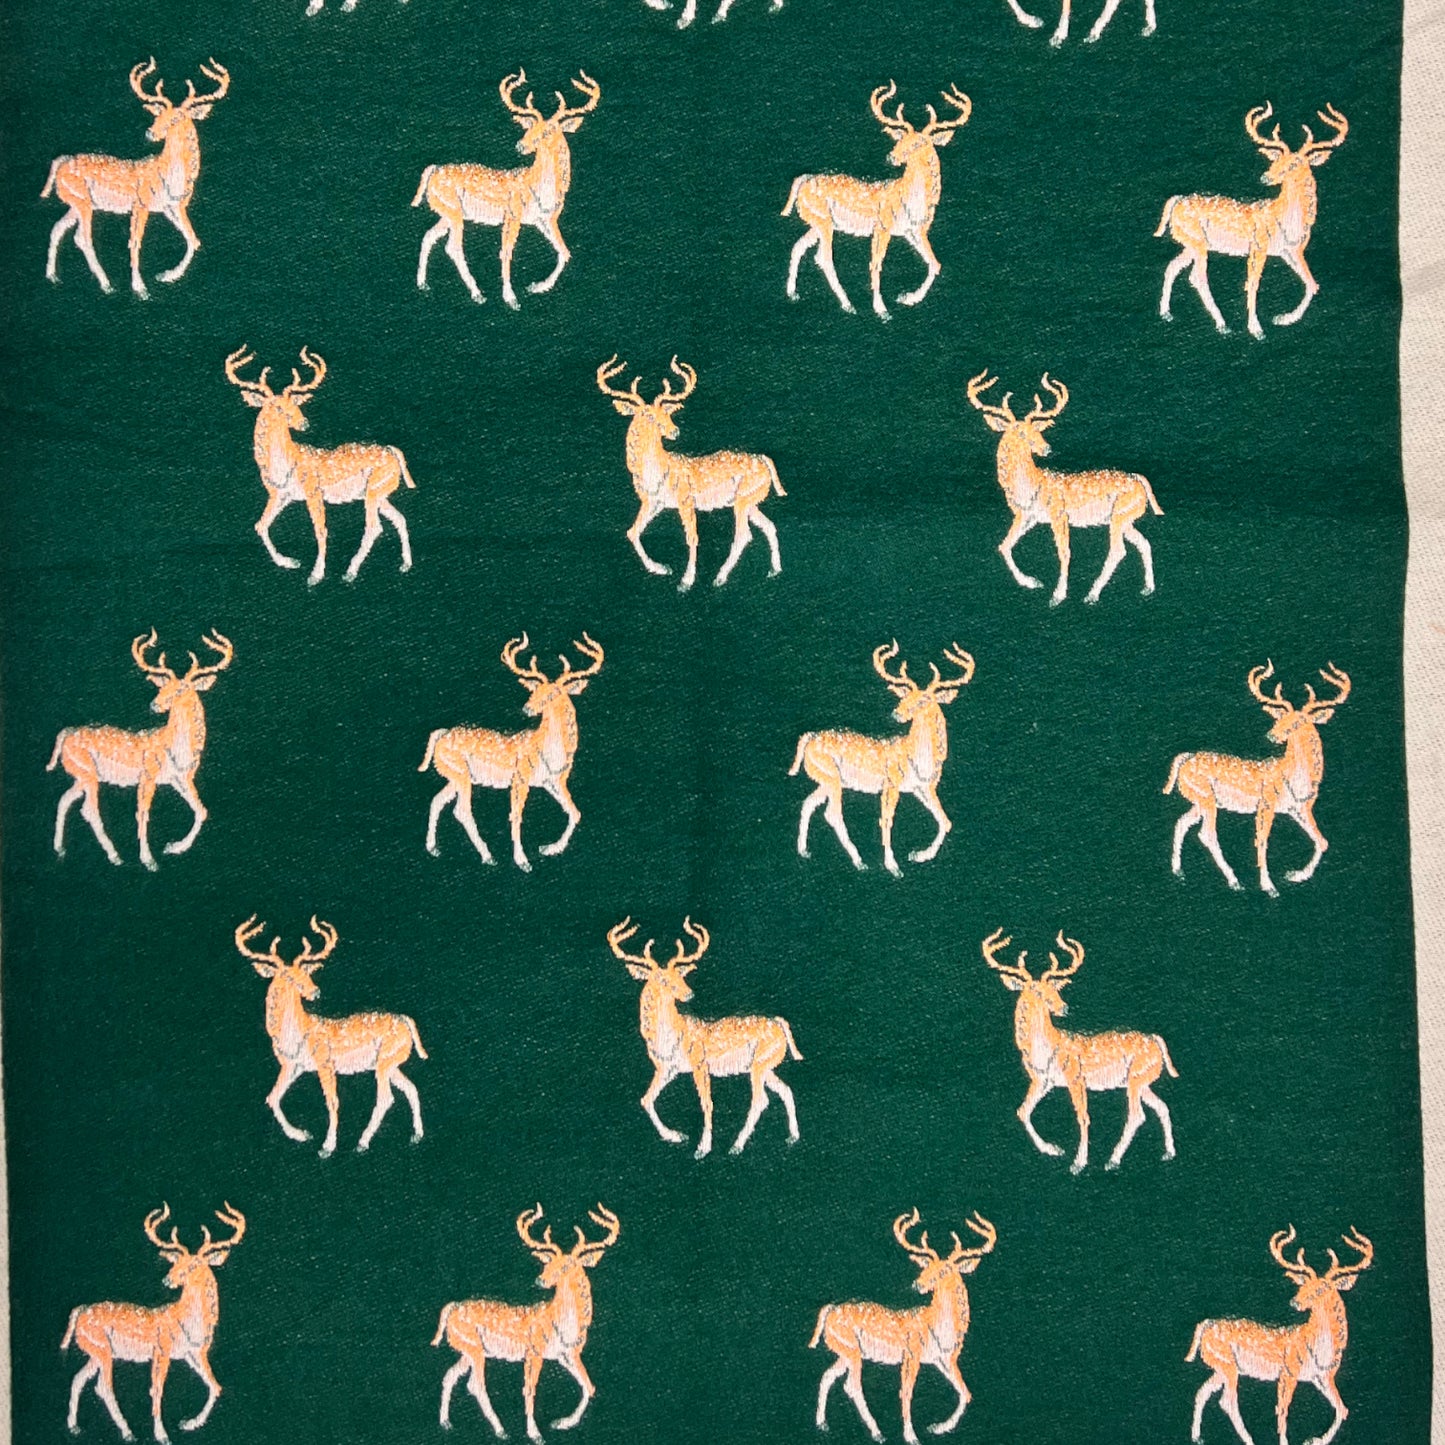 This reversible scarf is crafted from a luxurious cashmere blend and features a beautiful deer embroidered print. The perfect accessory to transition between seasons, it provides warmth and style for any occasion.     80% Viscose, 20% Wool  L: 180cm x W: 75c